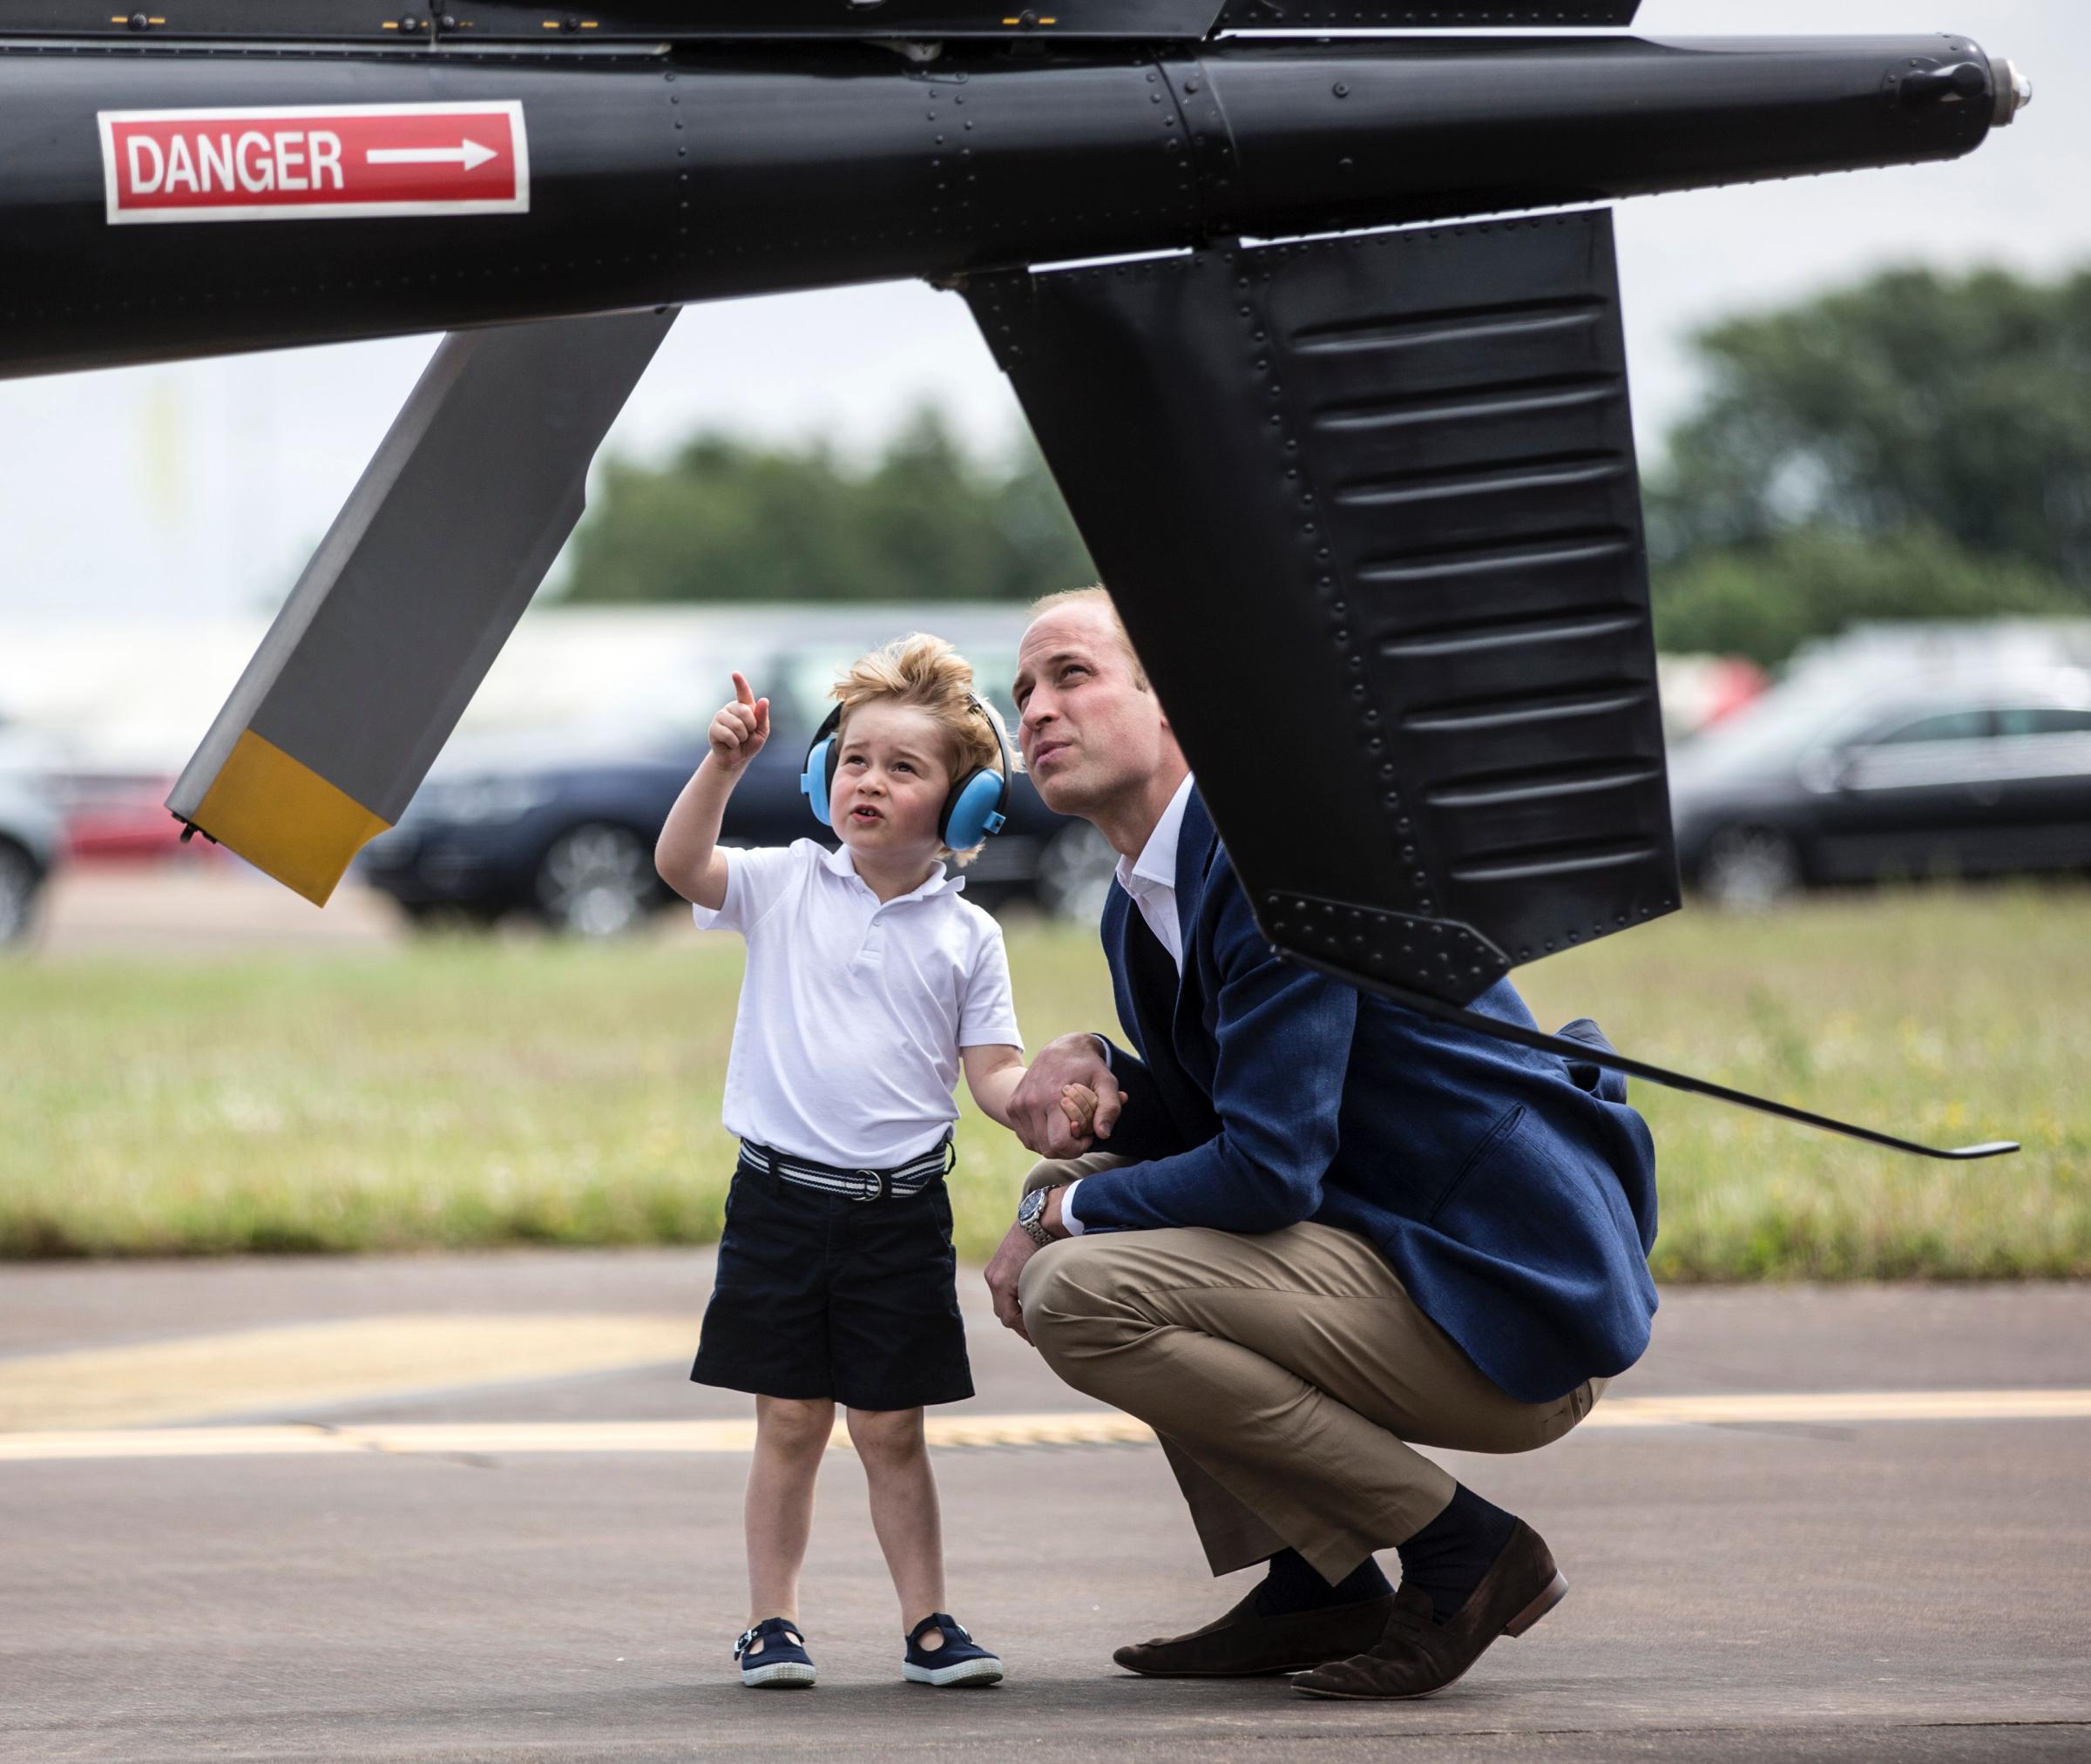 Britain's Prince George points as he and his father, Prince William, look at a 'Squirrel' helicopter during a visit to the Royal International Air Tattoo at RAF Fairford in western England on July 8, 2016.